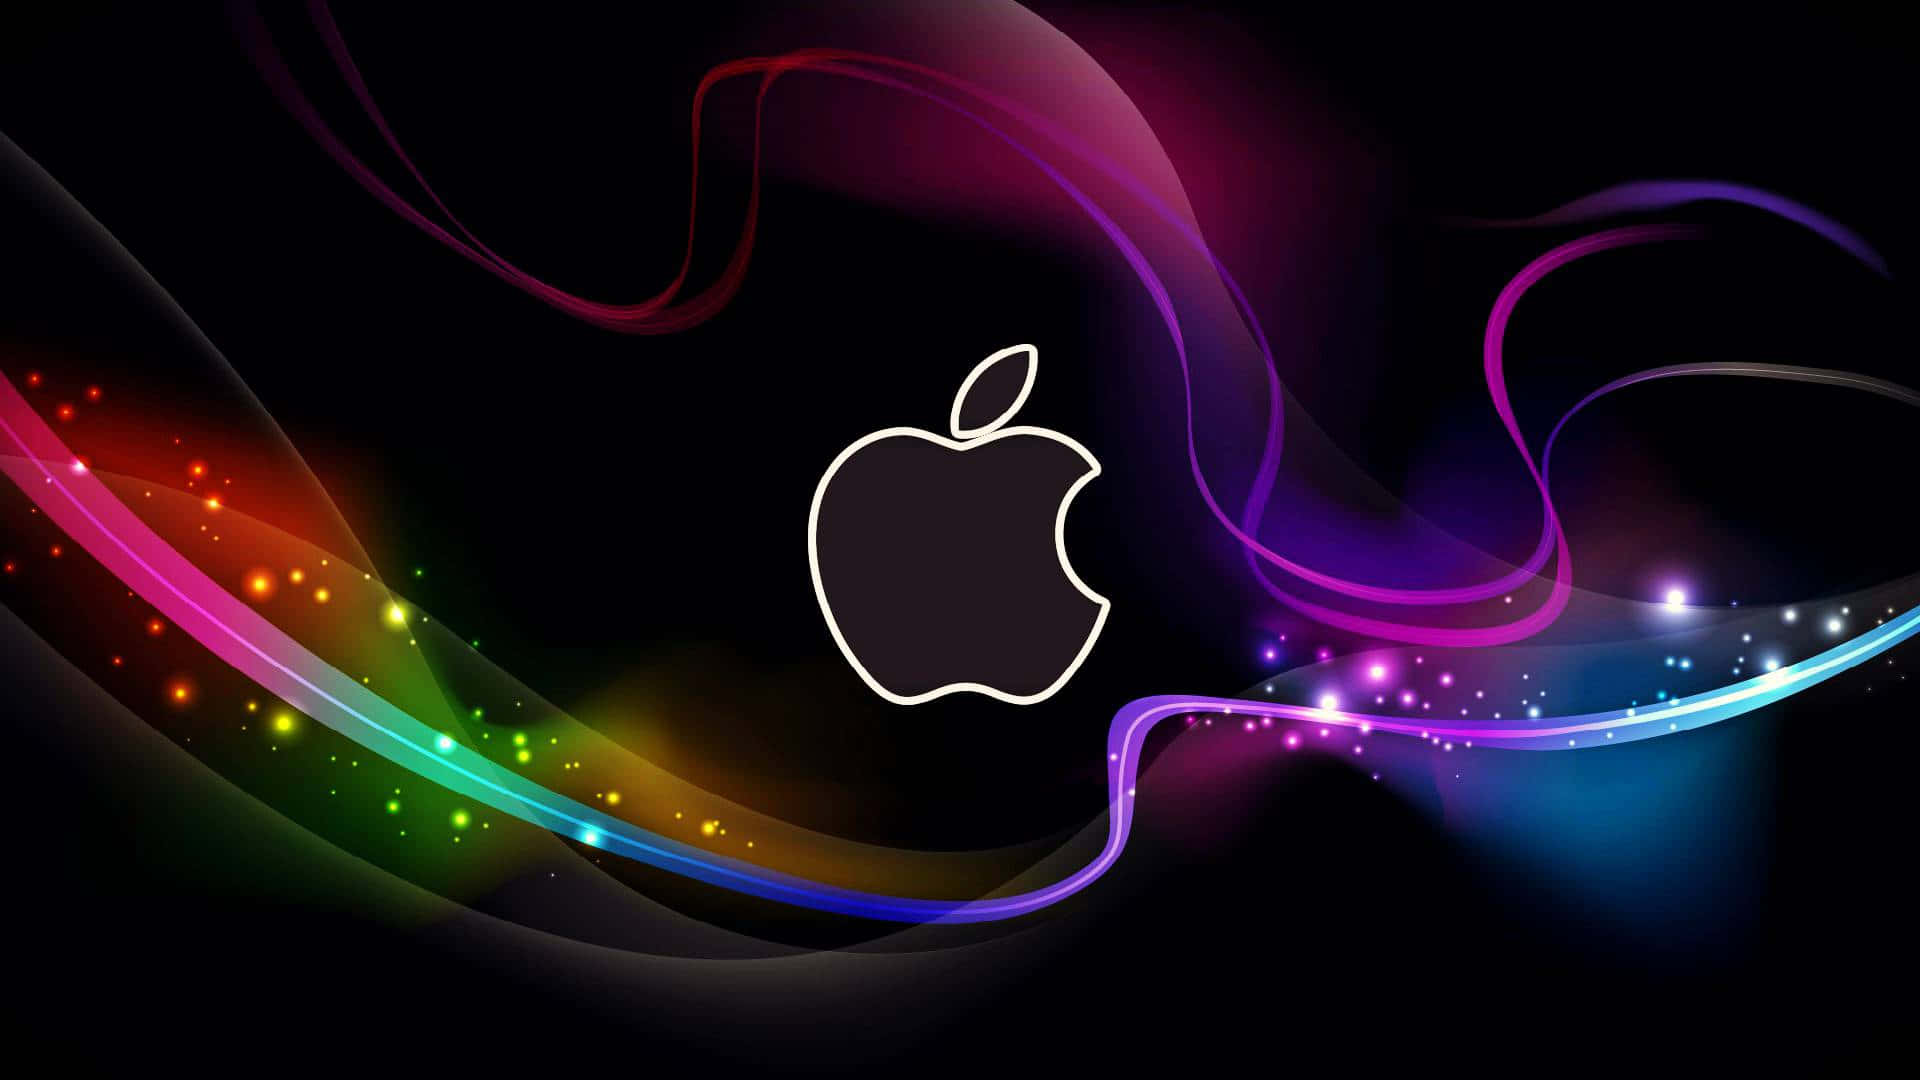 Cool Mac Logo Surrounded By Colorful Strings